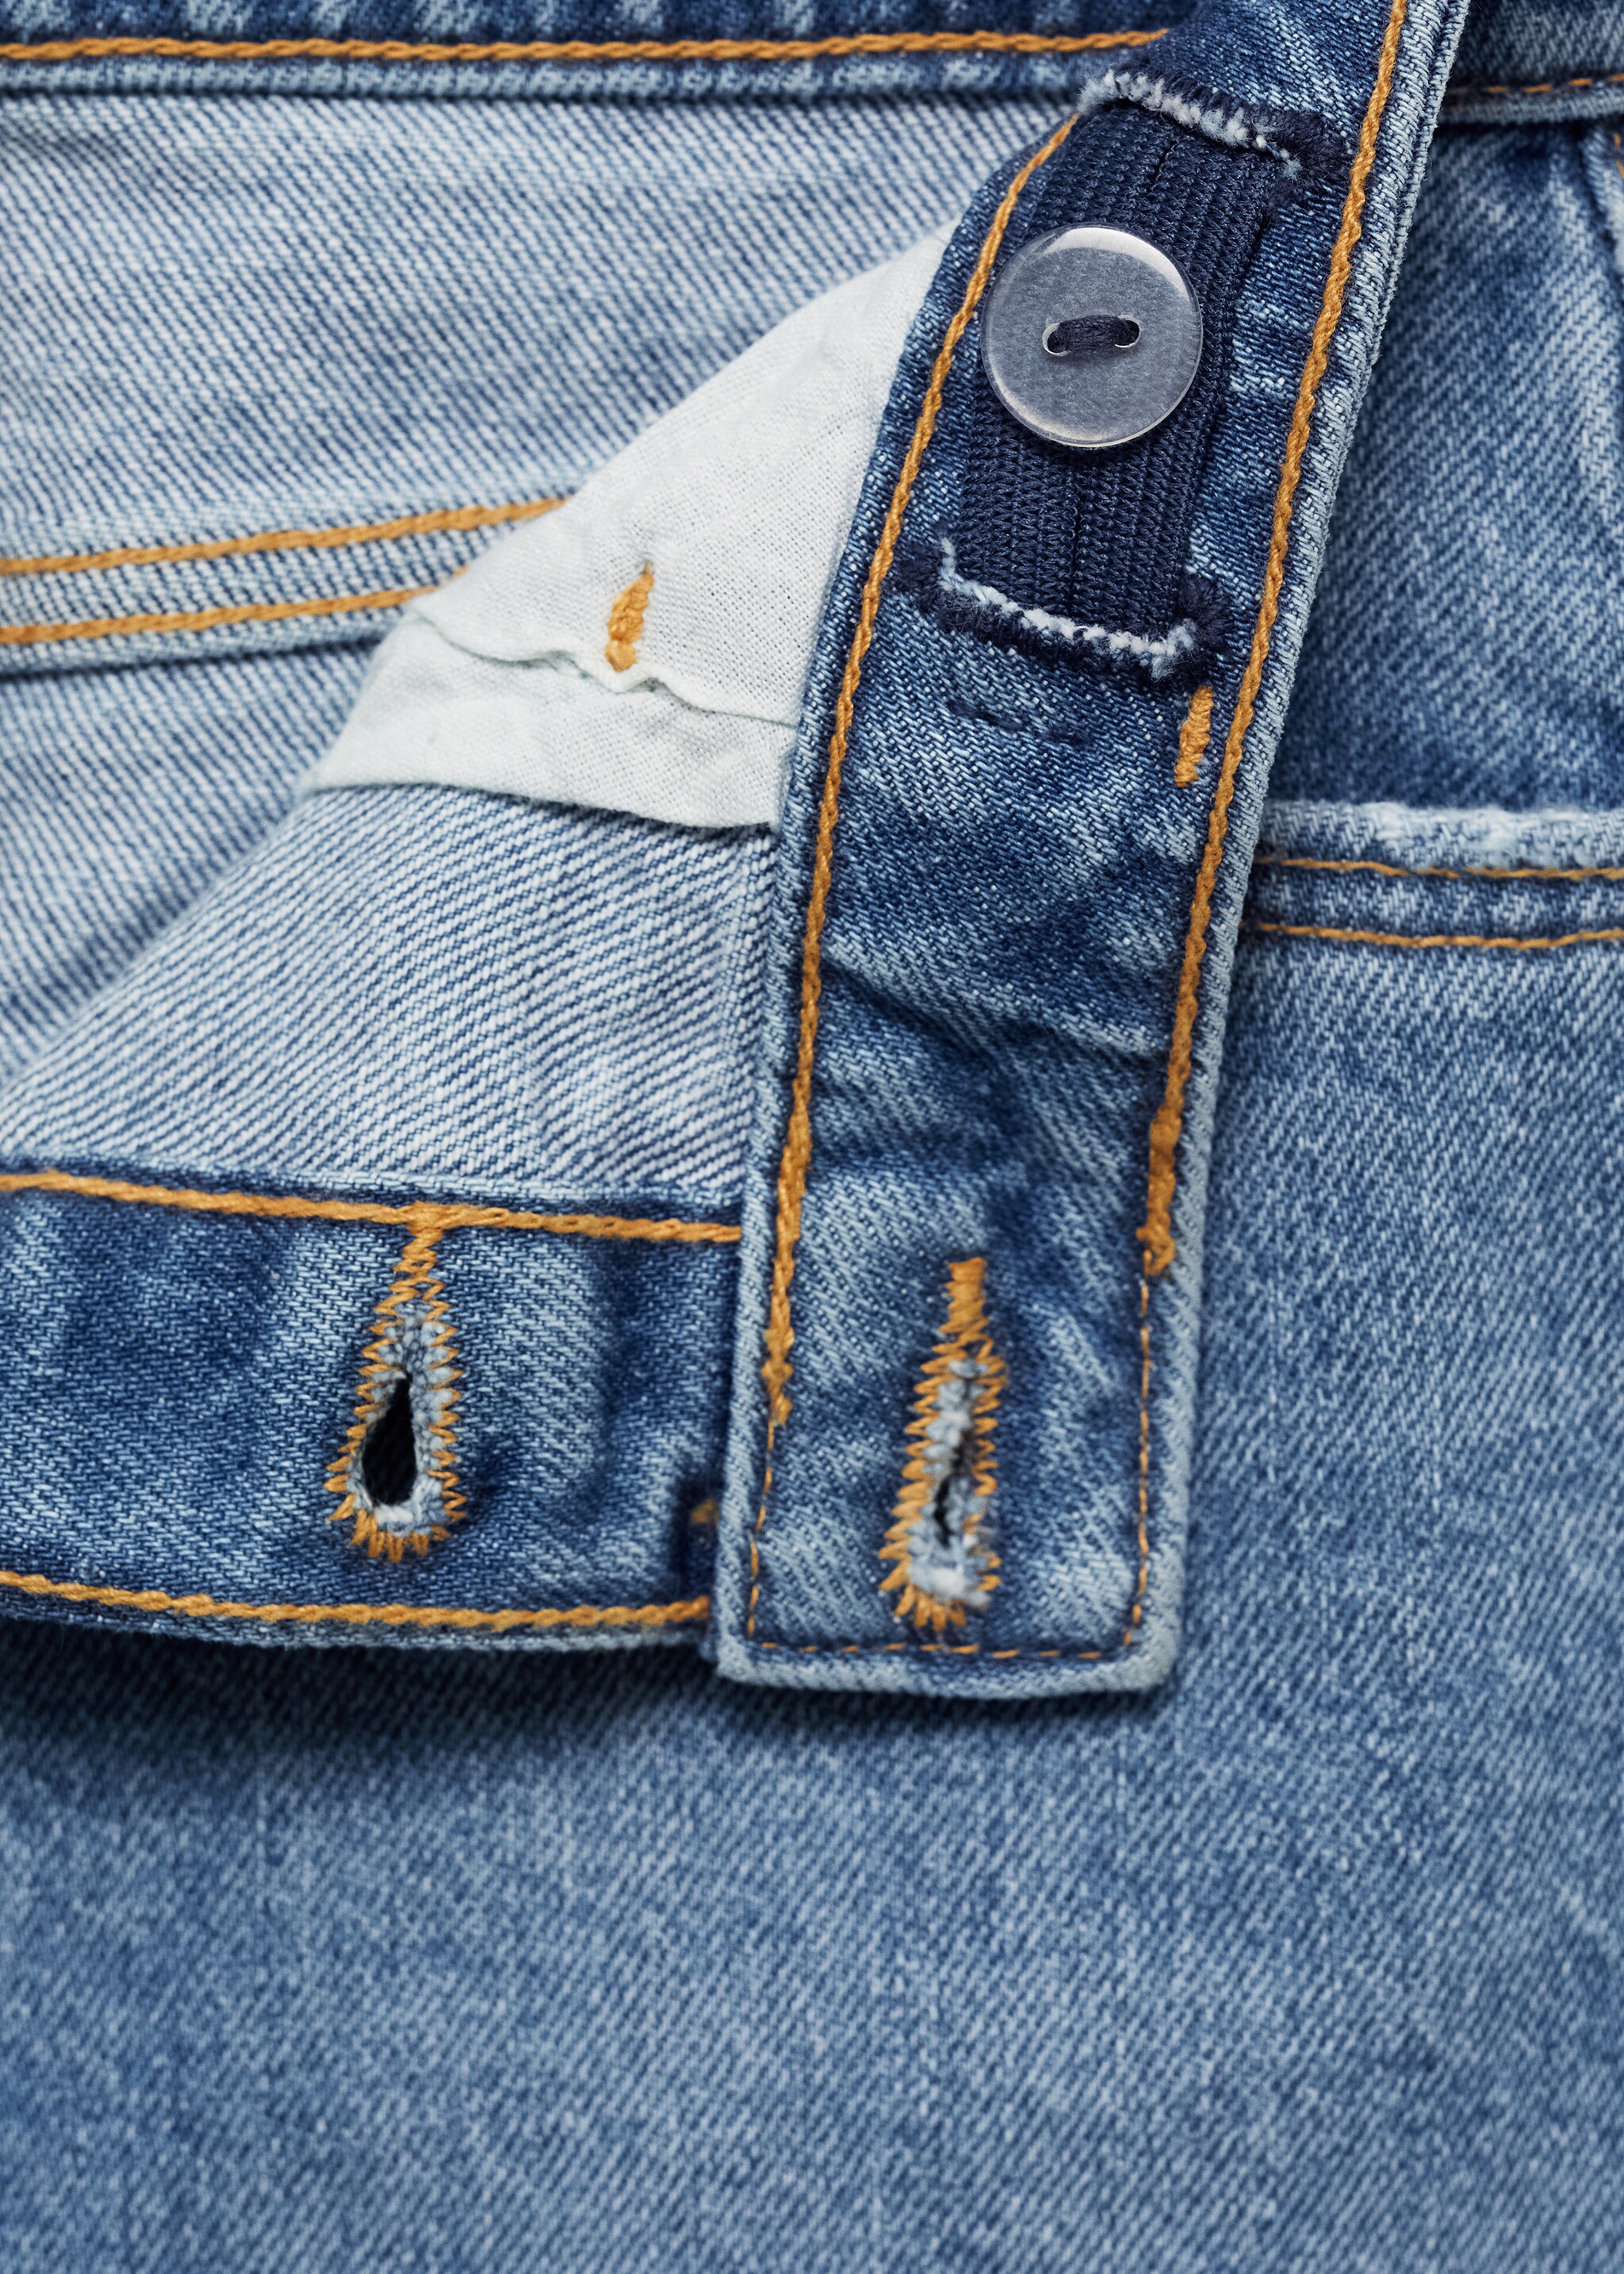 Buttoned denim skirt - Details of the article 8